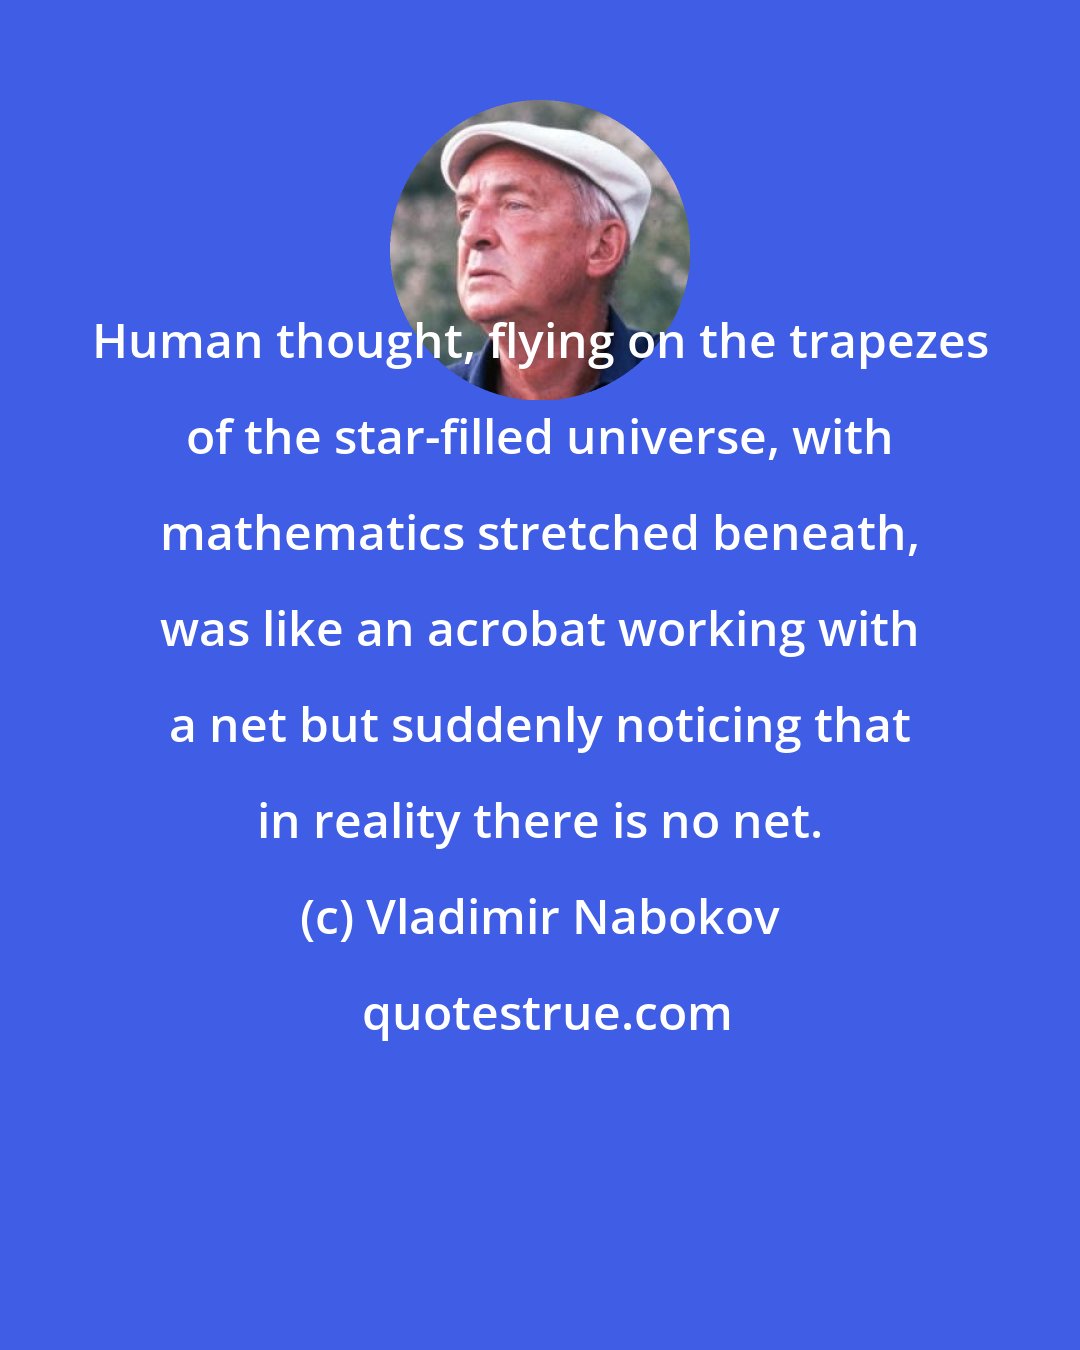 Vladimir Nabokov: Human thought, flying on the trapezes of the star-filled universe, with mathematics stretched beneath, was like an acrobat working with a net but suddenly noticing that in reality there is no net.